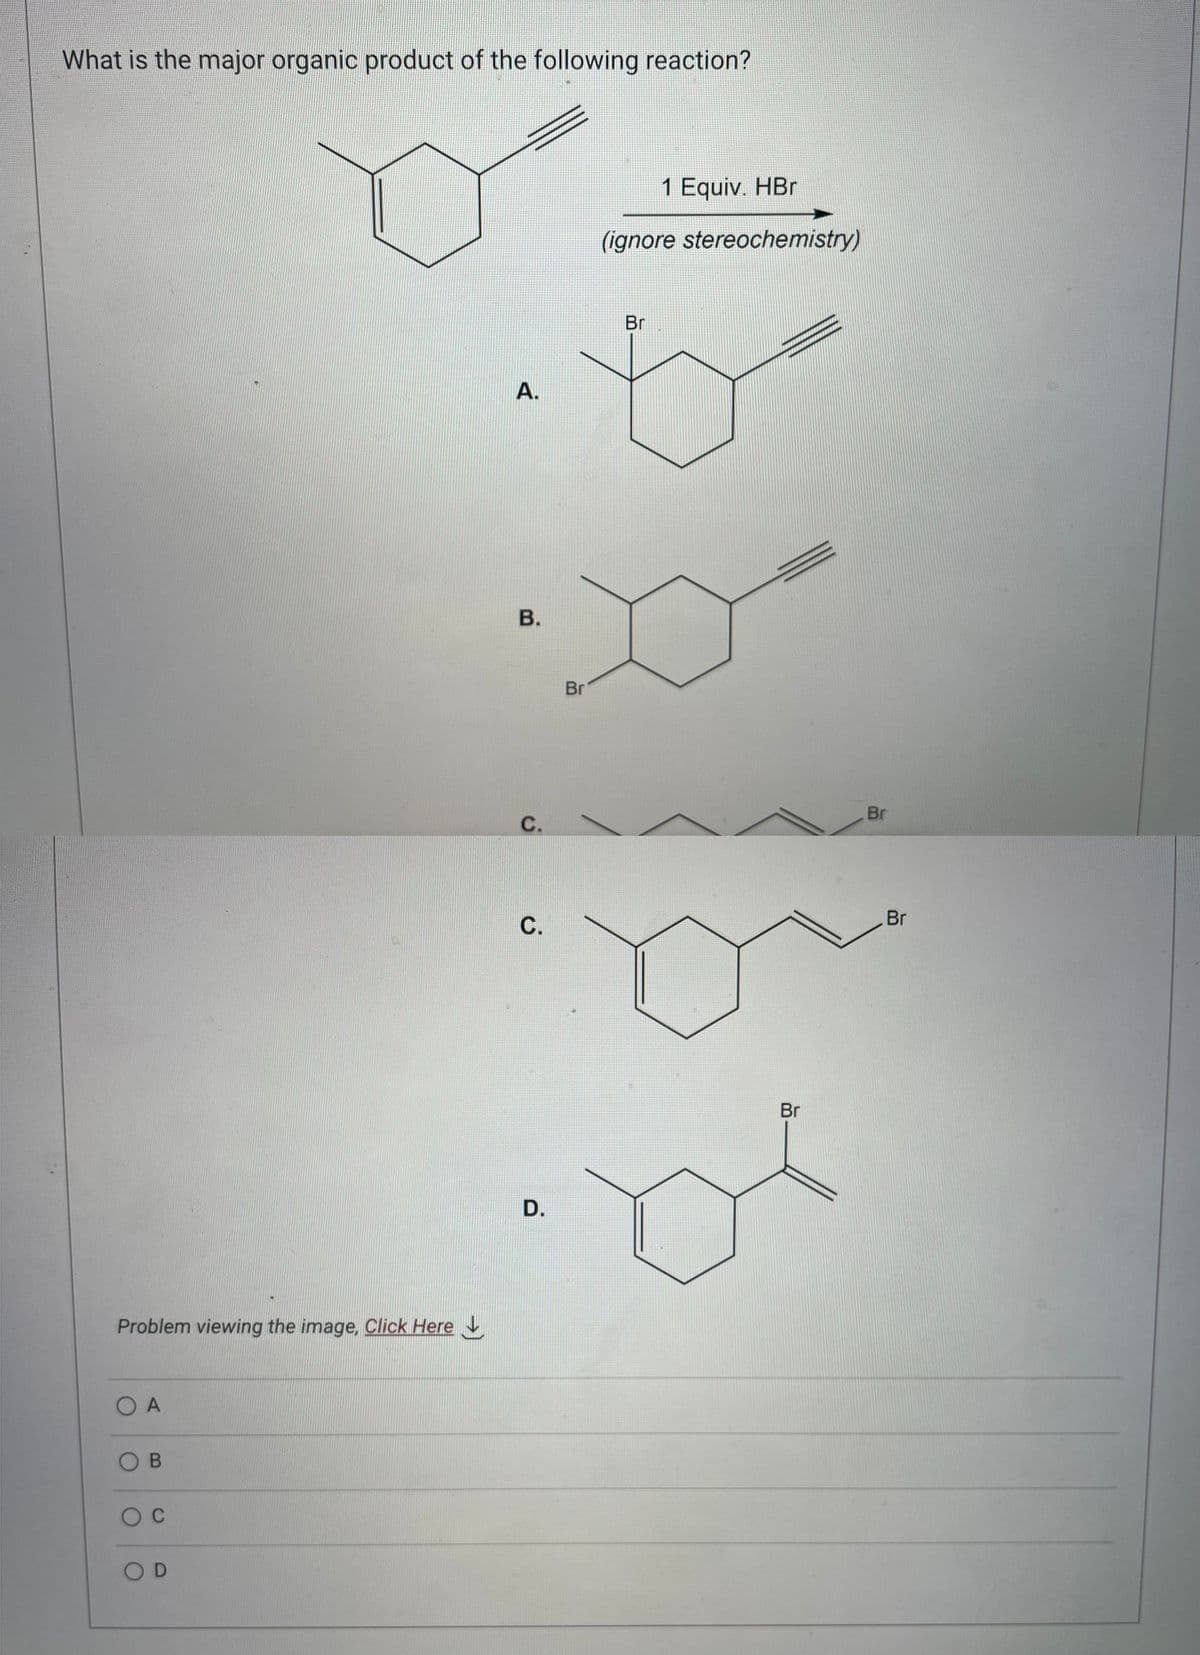 What is the major organic product of the following reaction?
Problem viewing the image. Click Here
OA
OB
O C
OD
A.
B.
C.
C.
D.
Br
1 Equiv. HBr
(ignore stereochemistry)
Br
Br
Br
Br